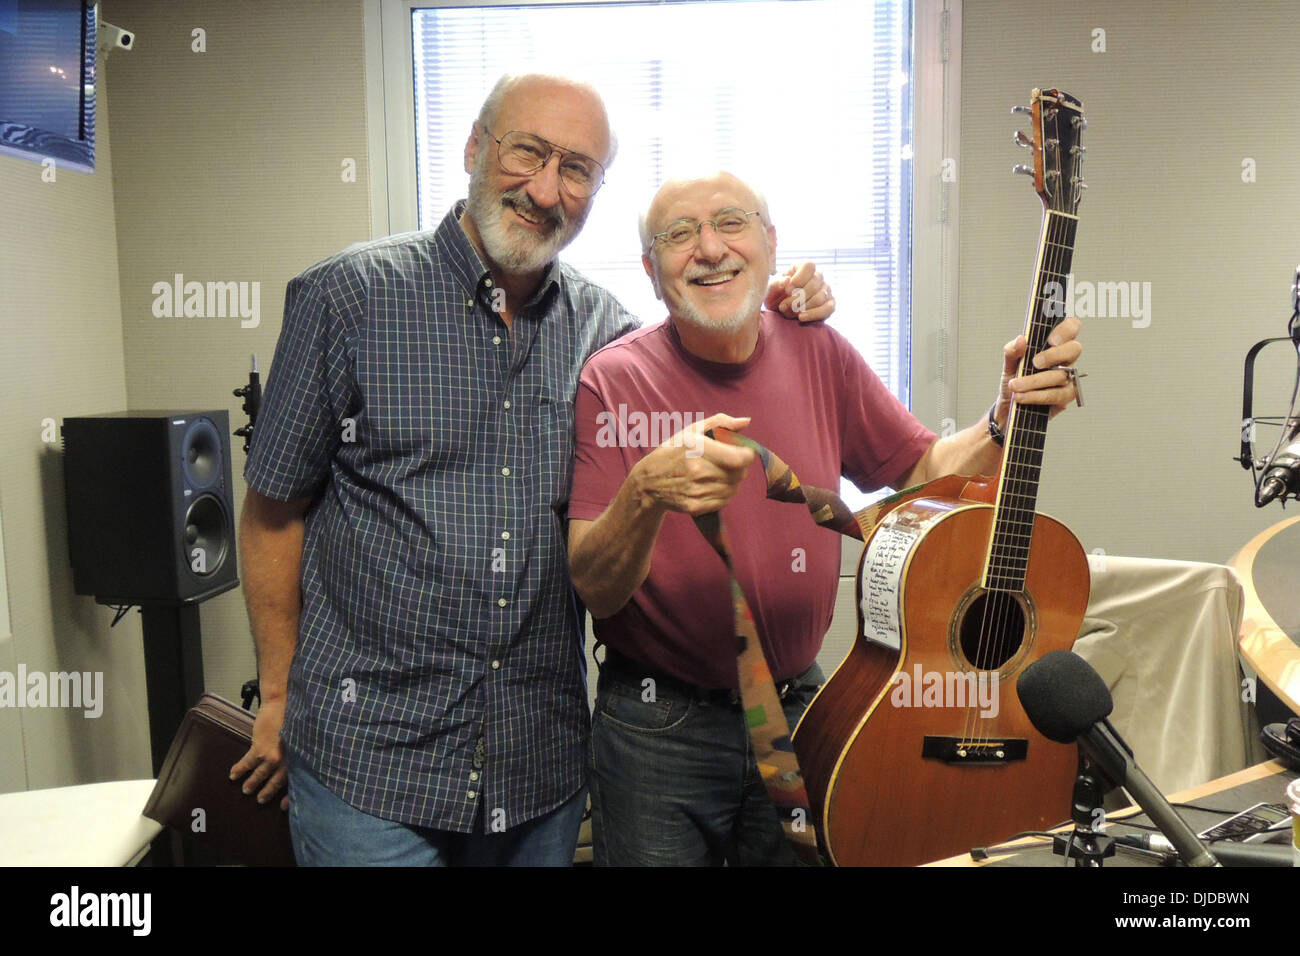 Peter Yarrow and Noel Paul Stookey of Peter, Paul & Mary during an interview at a recording studio New York City, USA - 26.07.12 Stock Photo